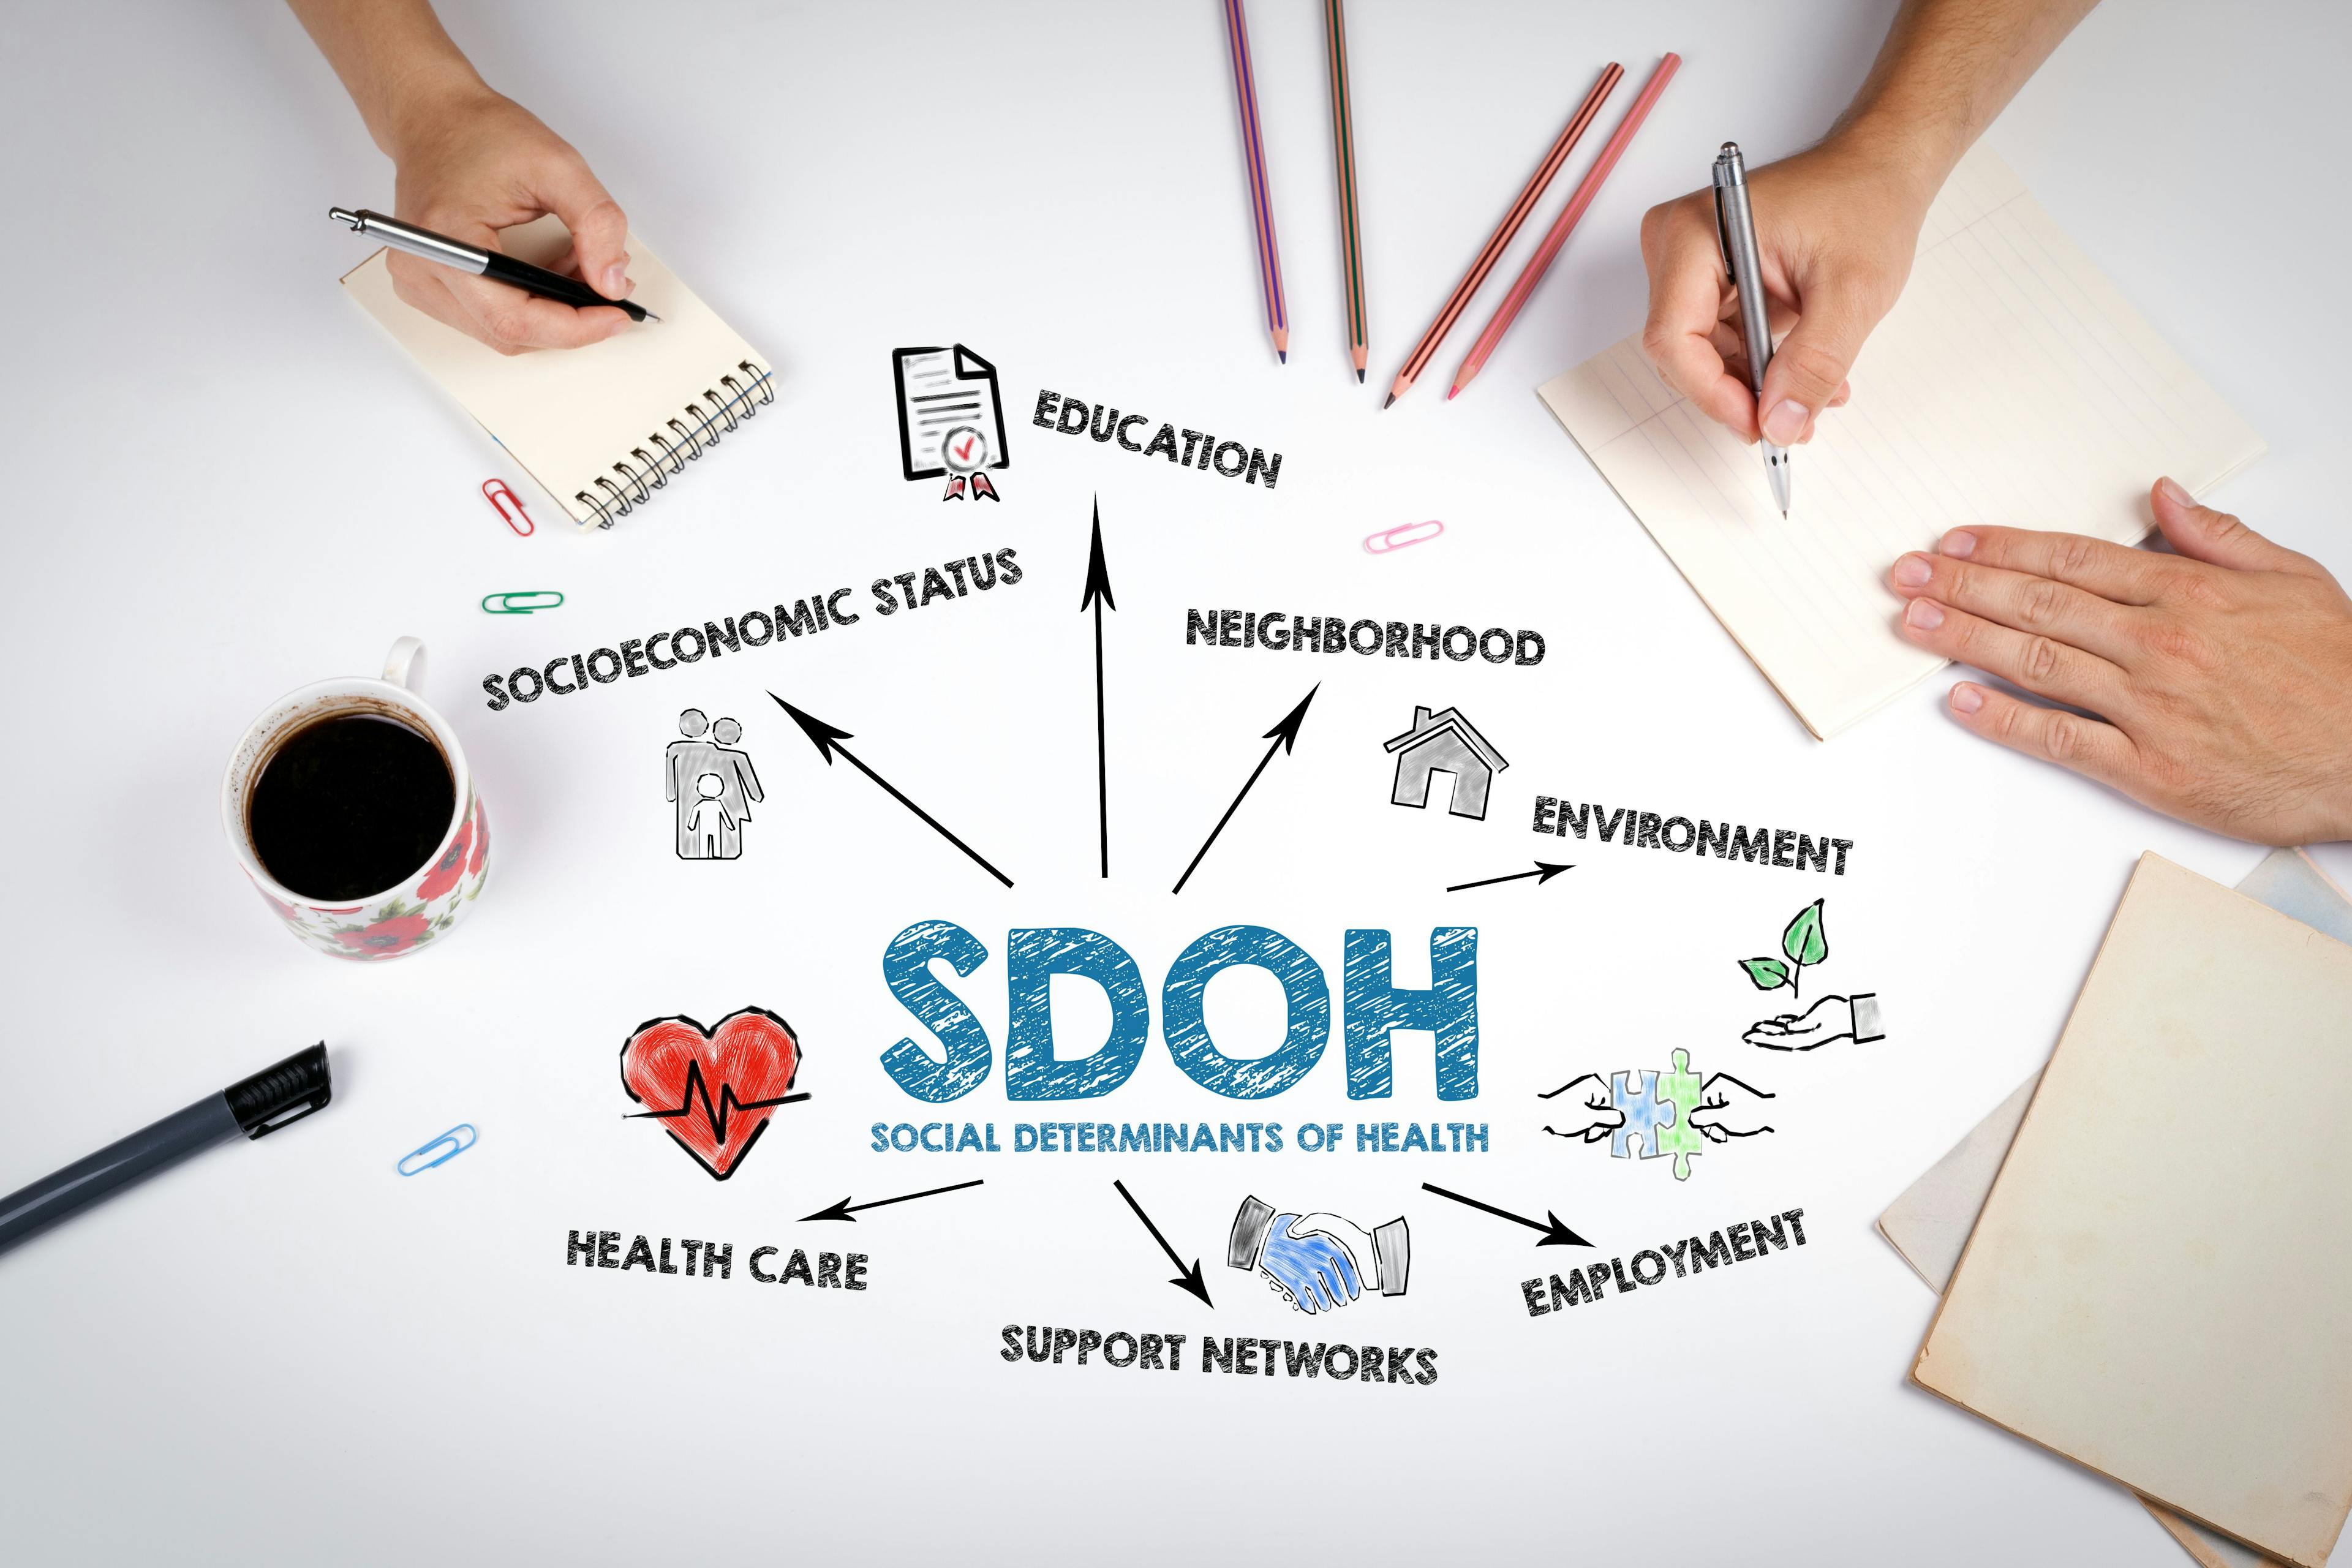 SDOH Social Determinants Of Health Concept - The meeting at the white office table | Image Credit: STOATPHOTO - stock.adobe.com